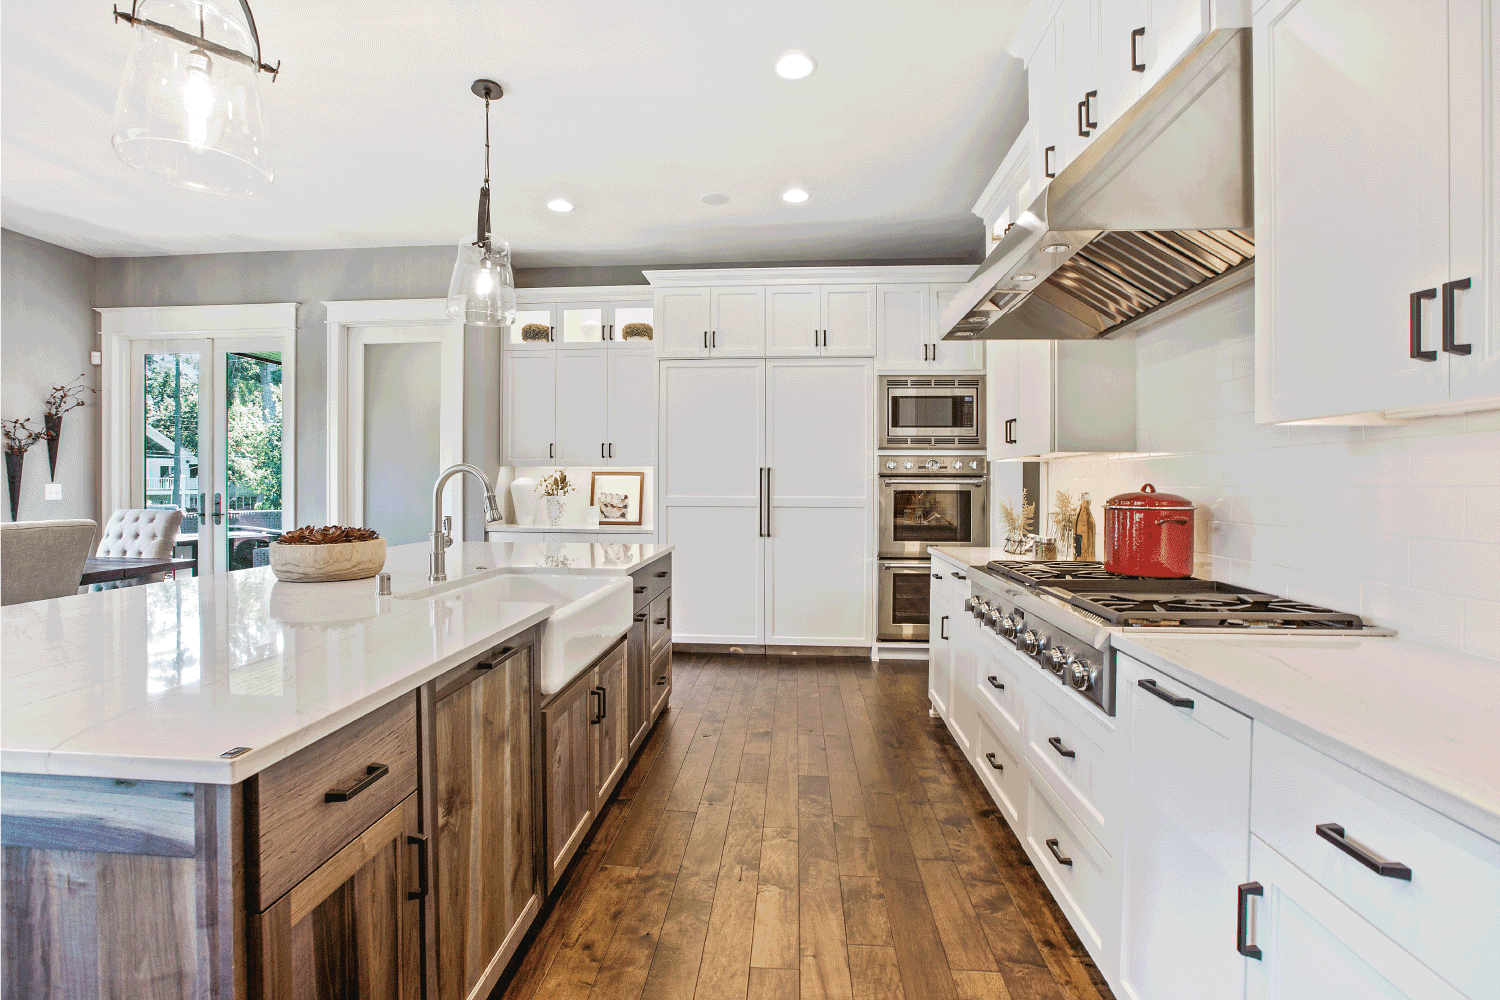 Brown and white colors throughout this kitchen and home